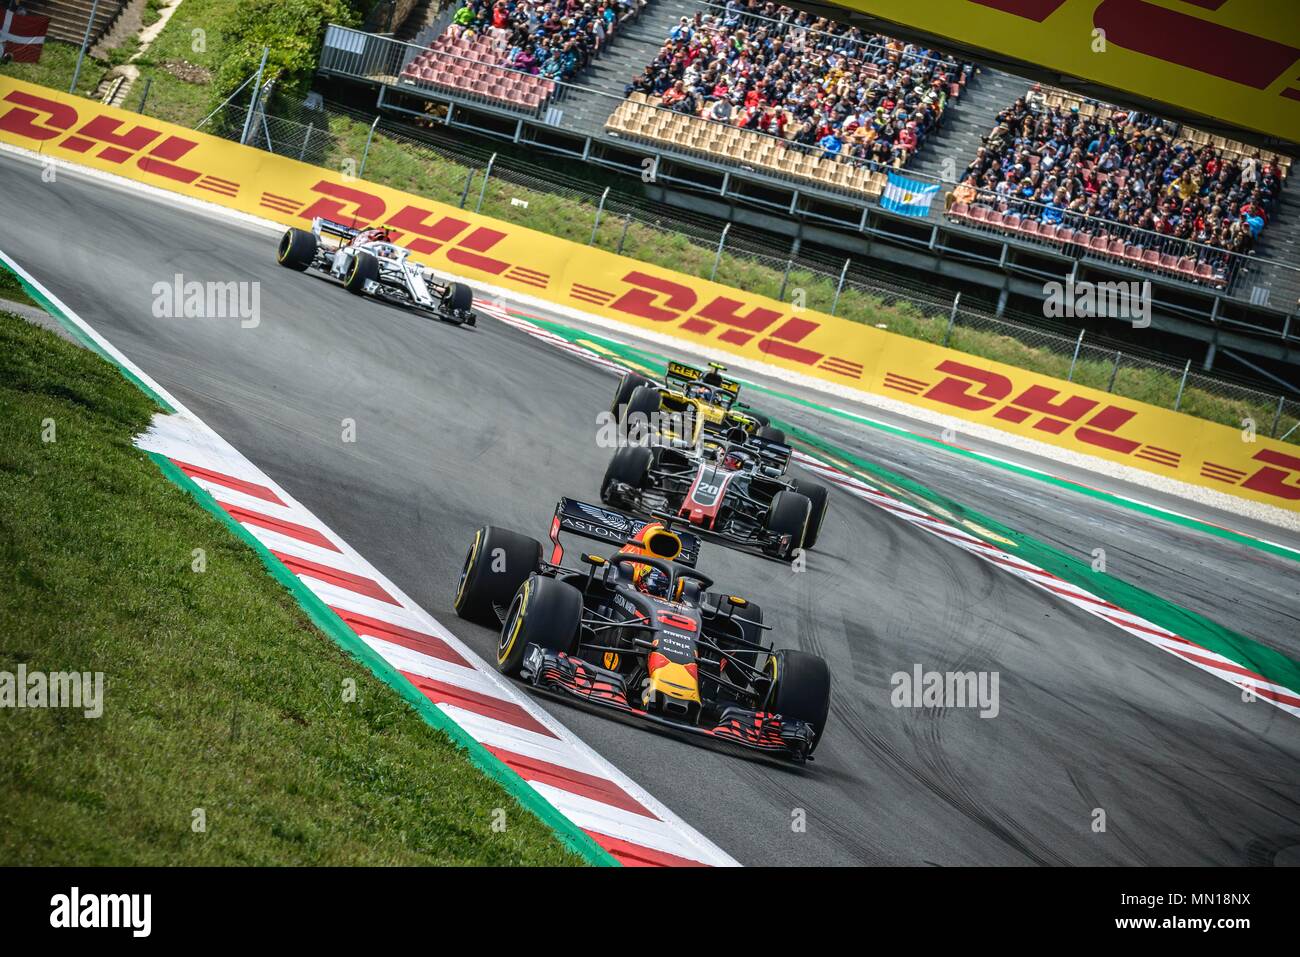 Barcelona, Spain. 13 May, 2018:  KEVIN MAGNUSSEN (DAN) drives during the Spanish GP at Circuit de Barcelona - Catalunya in his Red Bull RB14 Credit: Matthias Oesterle/Alamy Live News Stock Photo